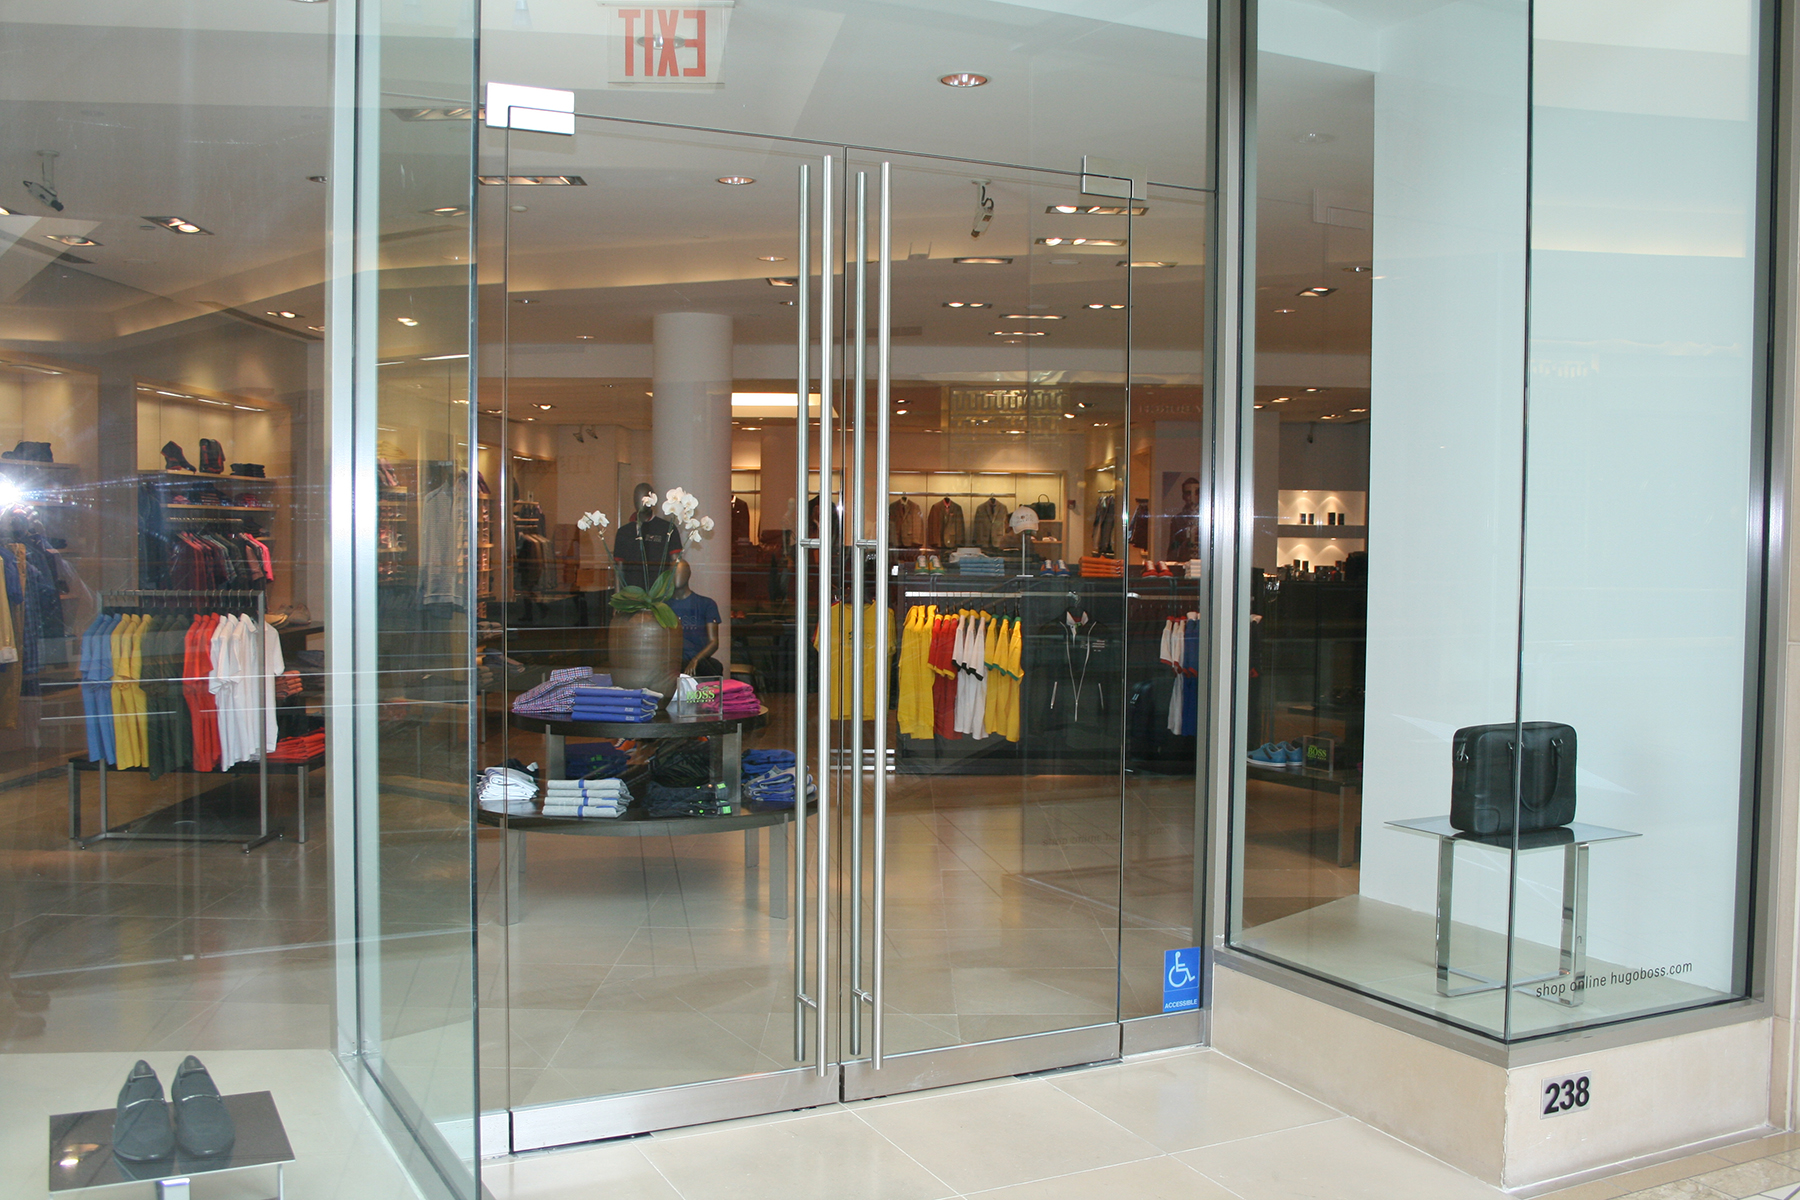 The Application of Glass Door Hardware in Retail Stores